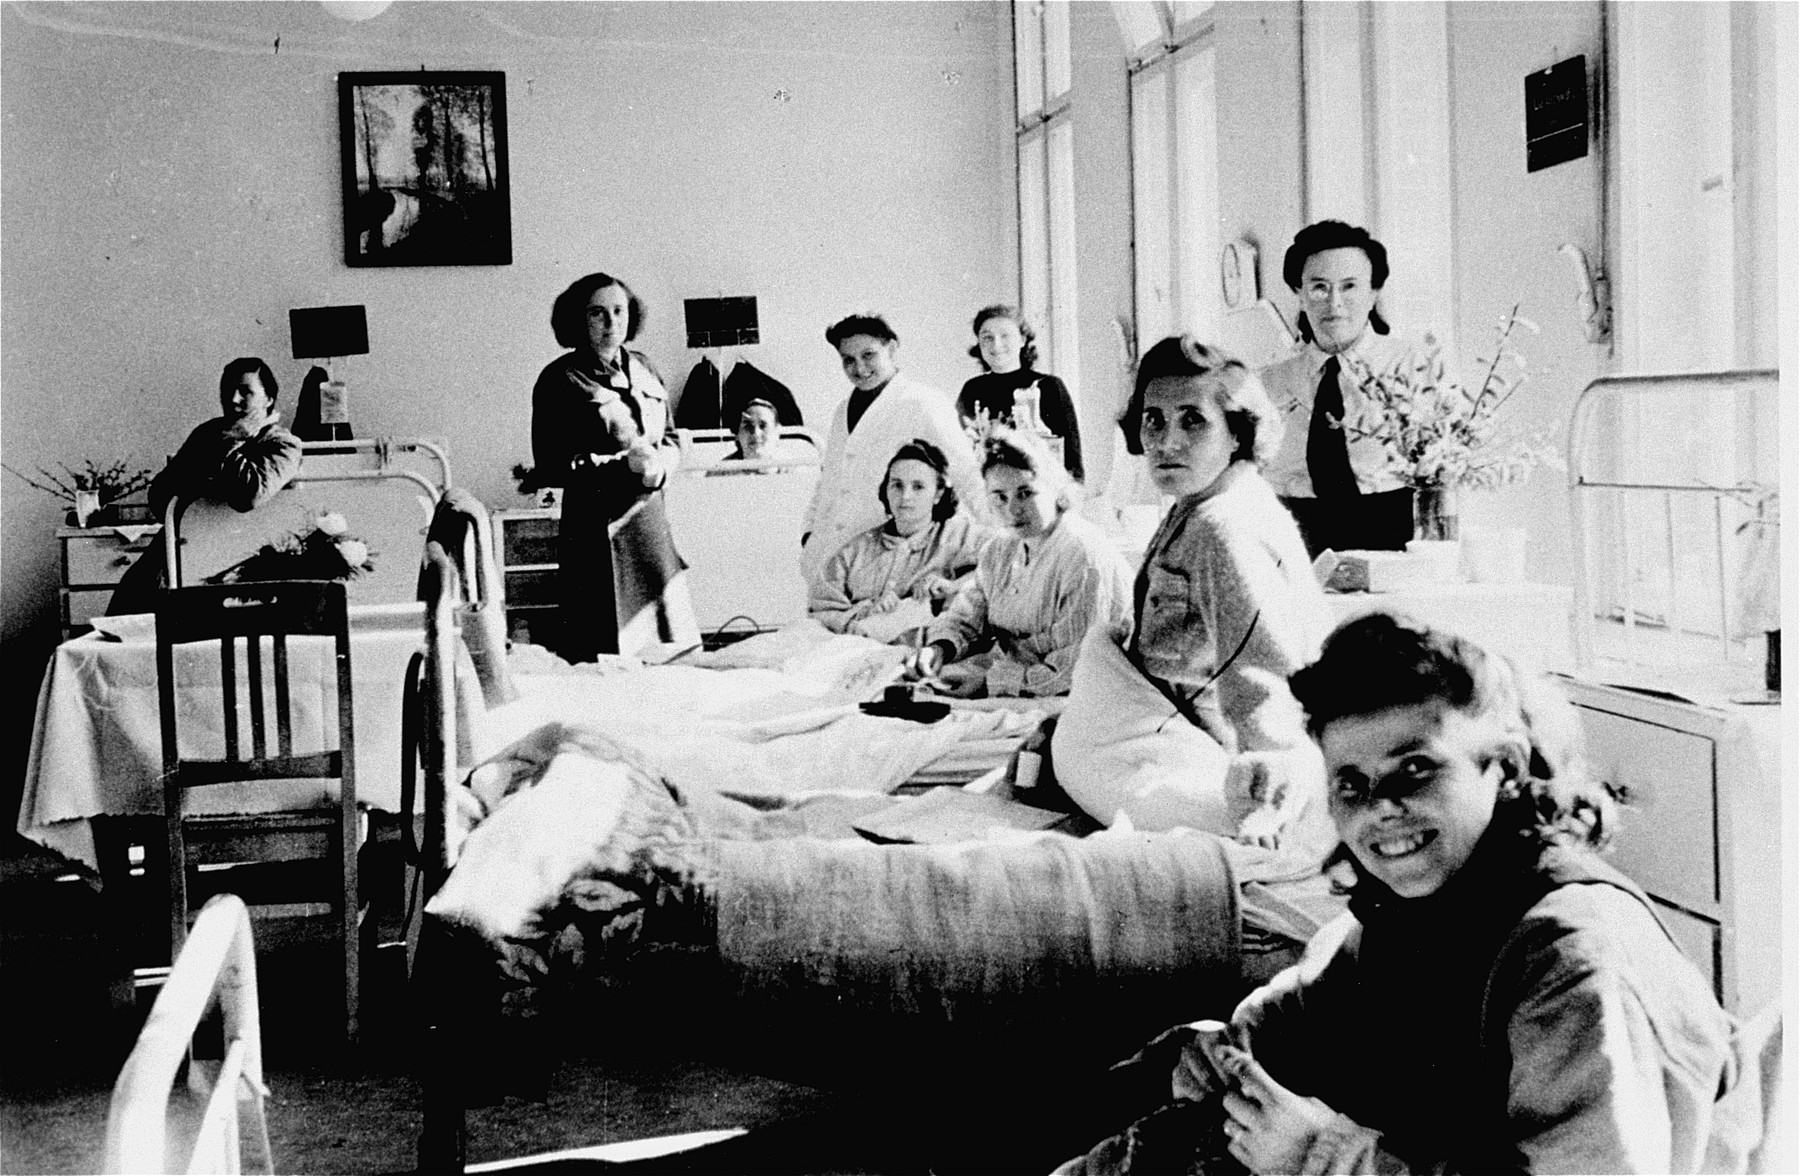 Women's ward of the hospital at the Bergen-Belsen DP camp.

The woman in the fourth bed from the right is Erzsabet Felberman Steiner. Both she and her sister Klara (originally from Gemzse, Hungary) survived Bergen-Belsen and remained there until they immigrated to Canada.   Pictured in the first bed in the front is is Franka Ptasznik Gertel from Lodz. She and her older sister were the only family members to survive the Auschwitz selection.